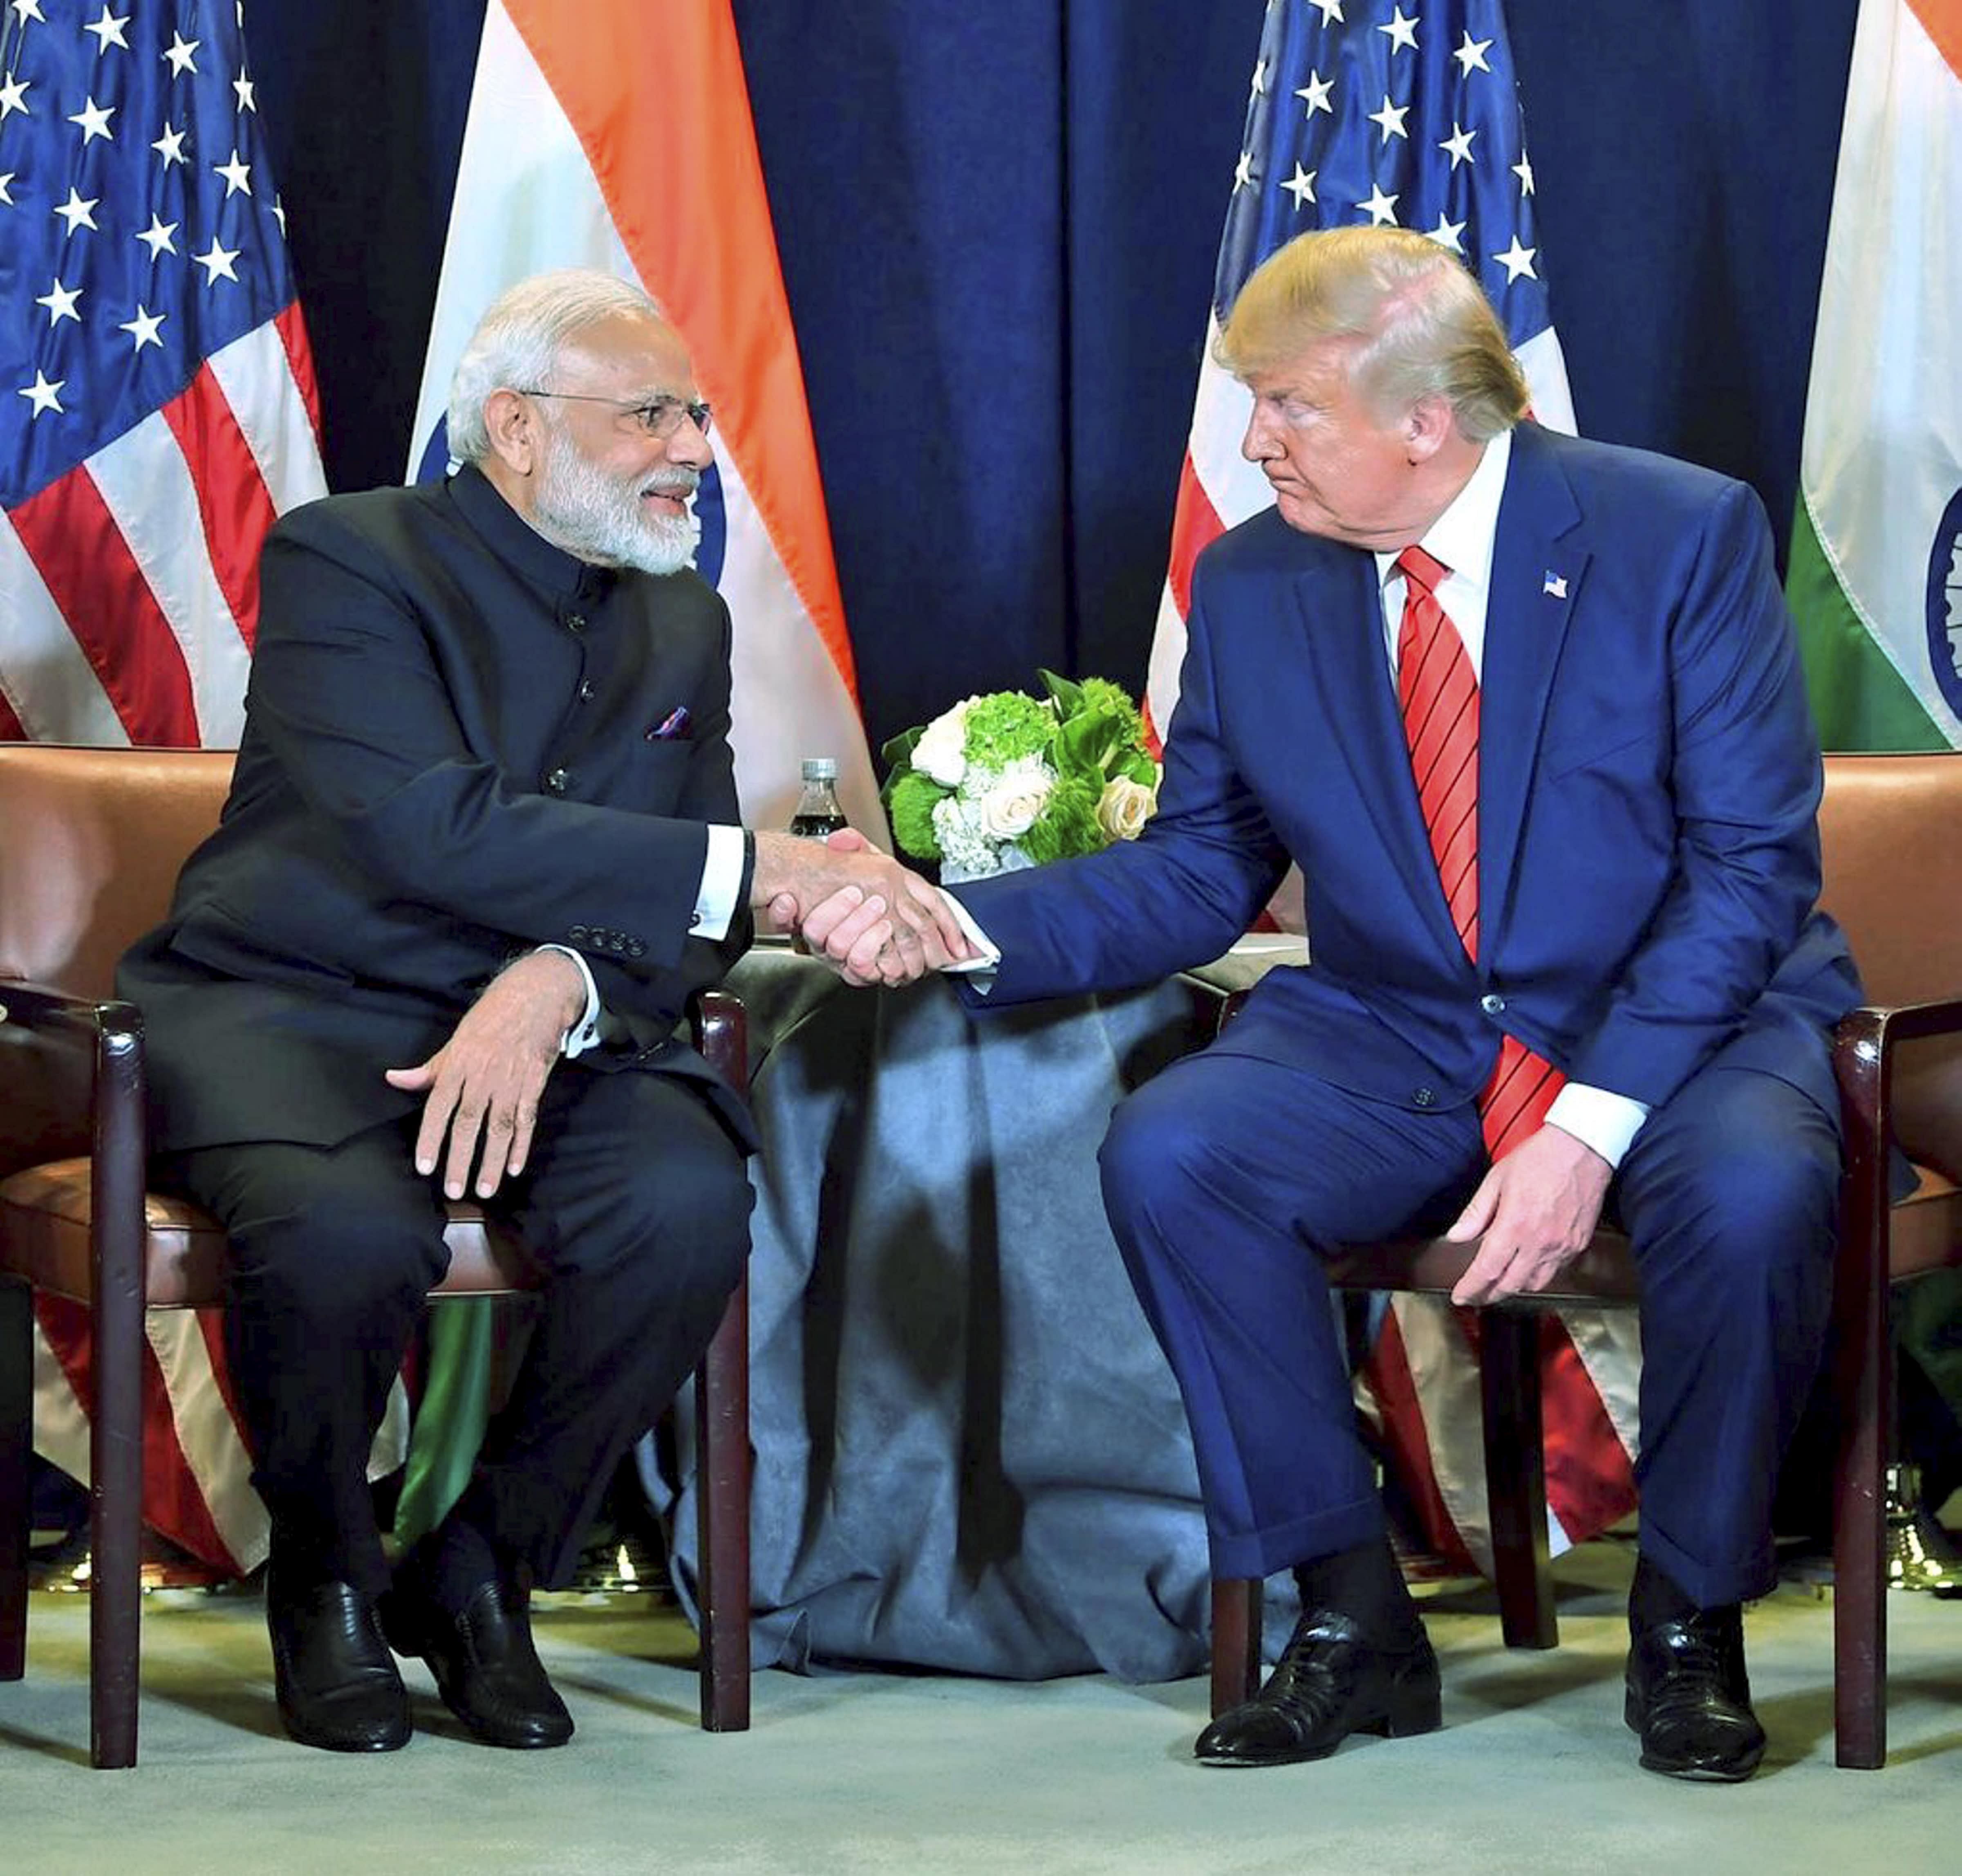 According to the White House official, Trump will arrive in Ahmedabad on Monday, where he will deliver remarks at Sardar Patel Stadium with Prime Minister Narendra Modi. (Credit: PTI Photo)